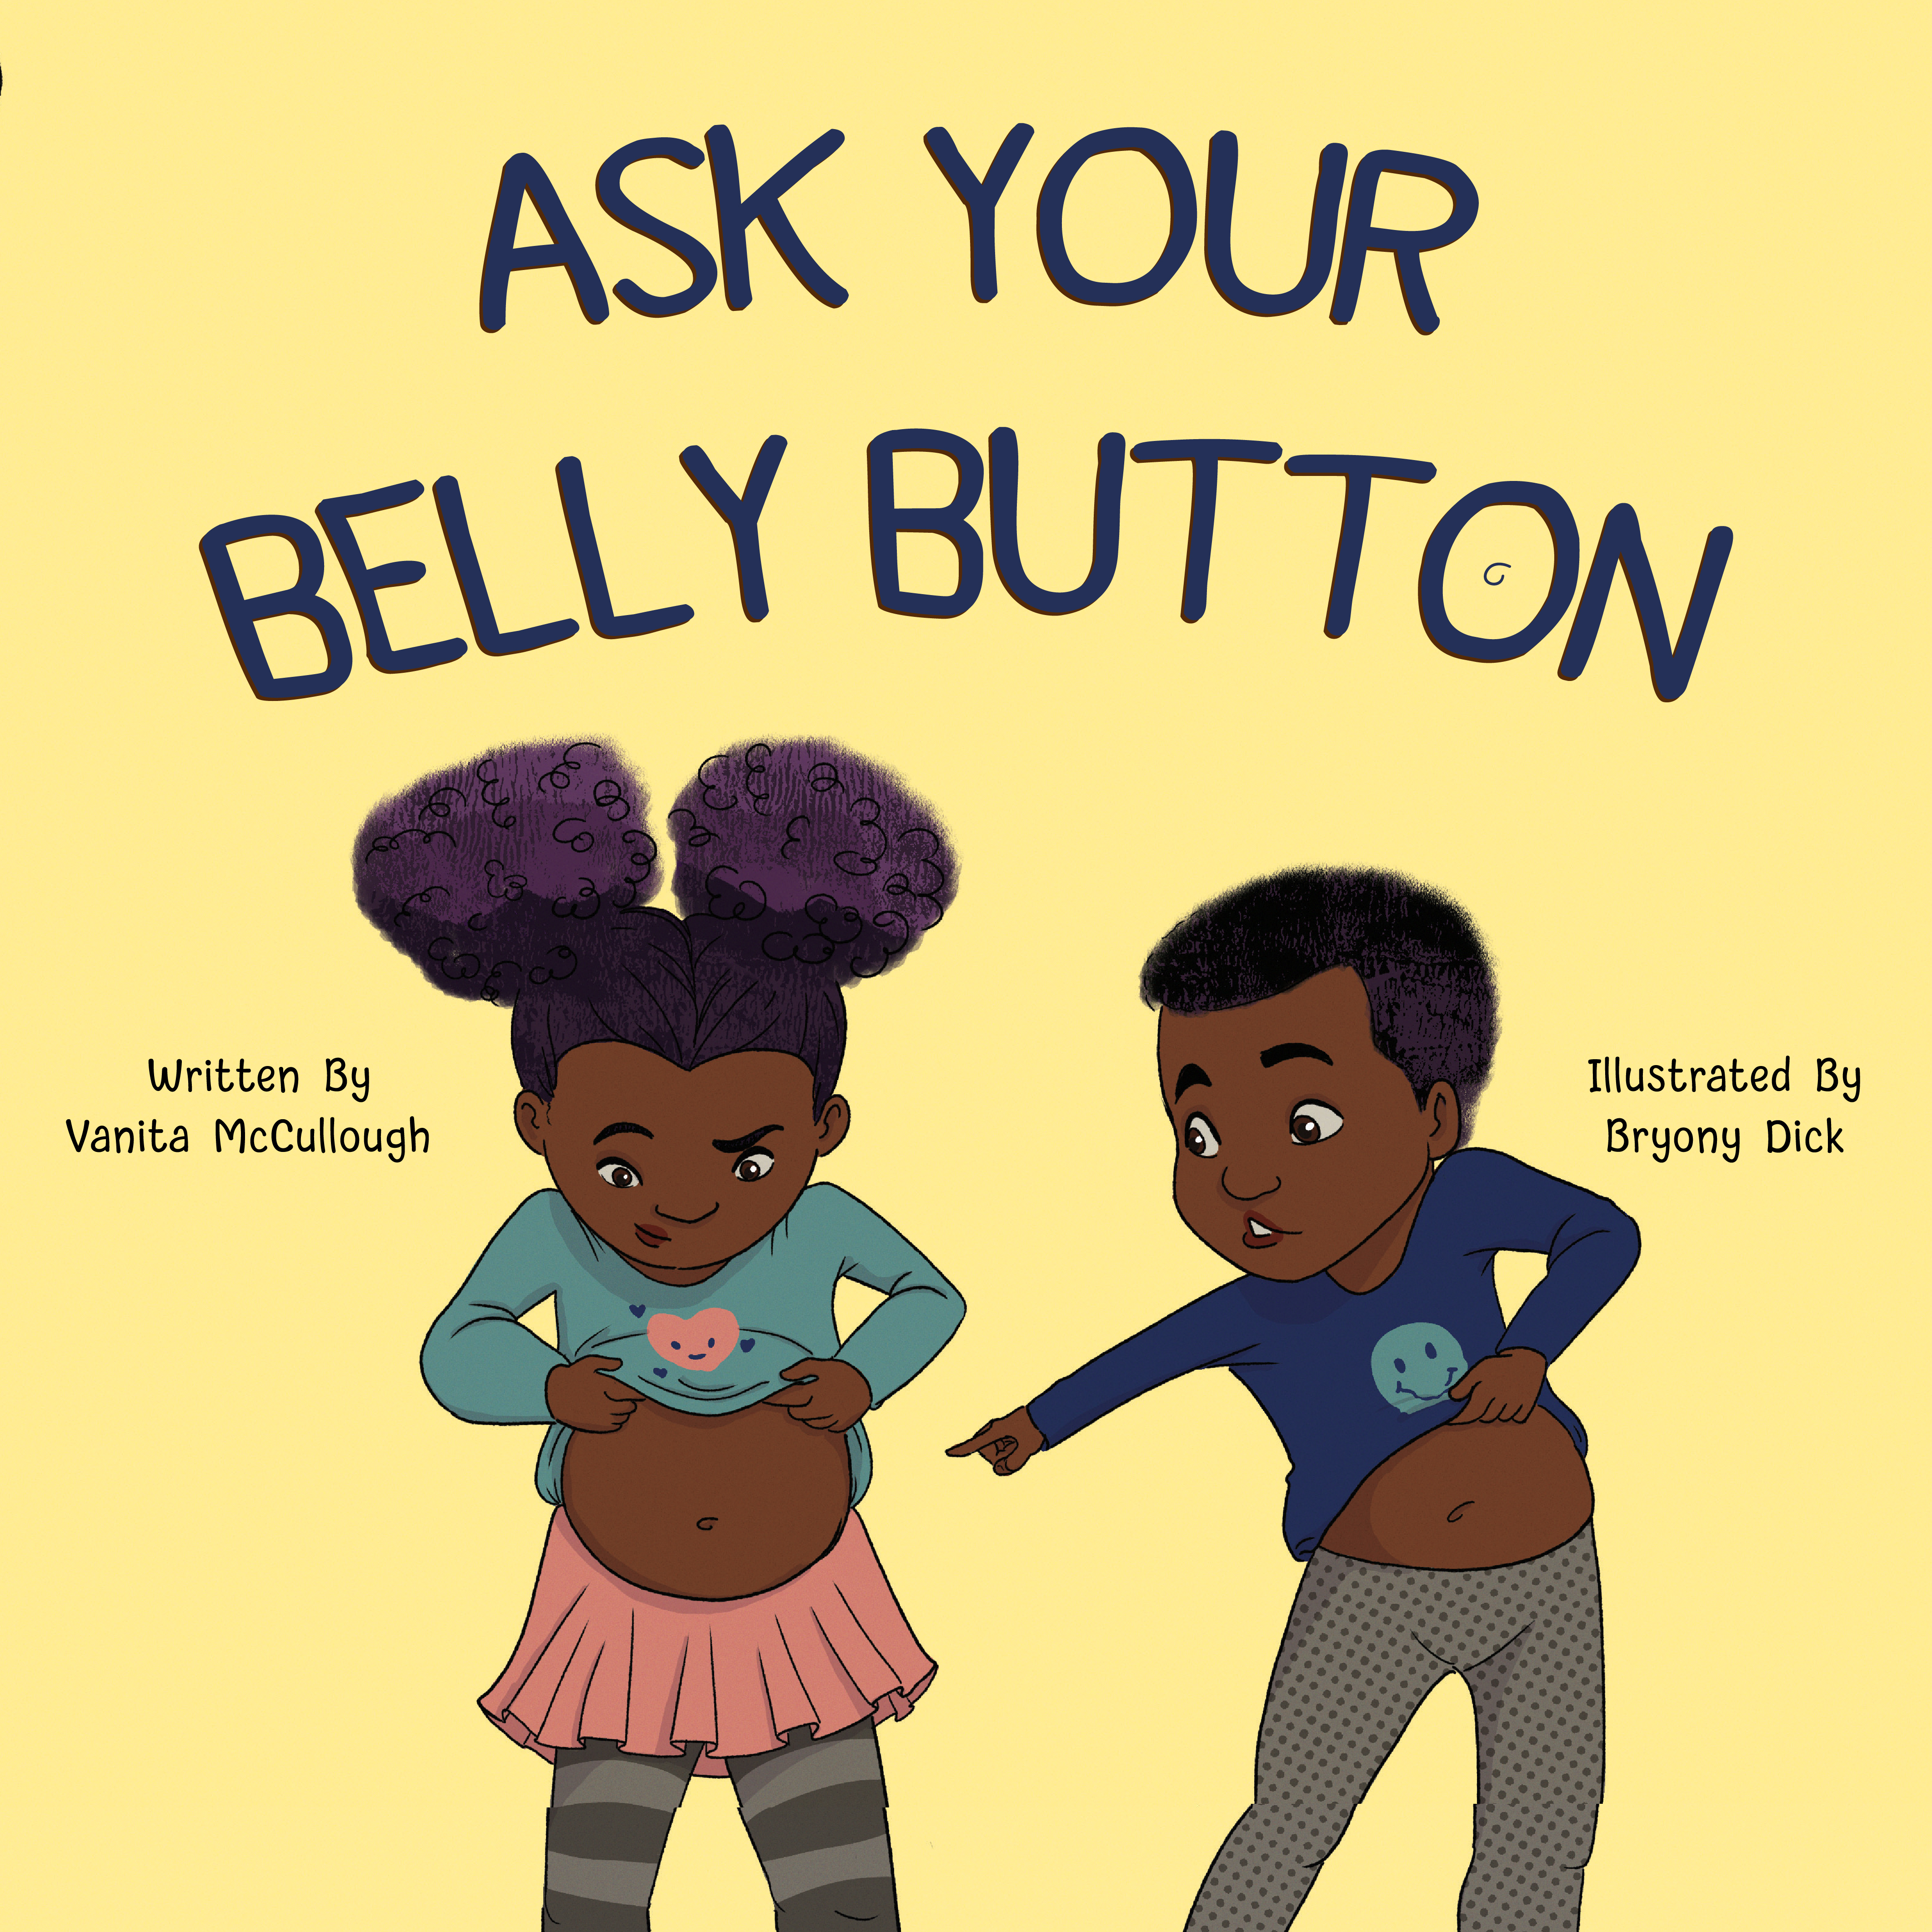 Ask your Belly Button